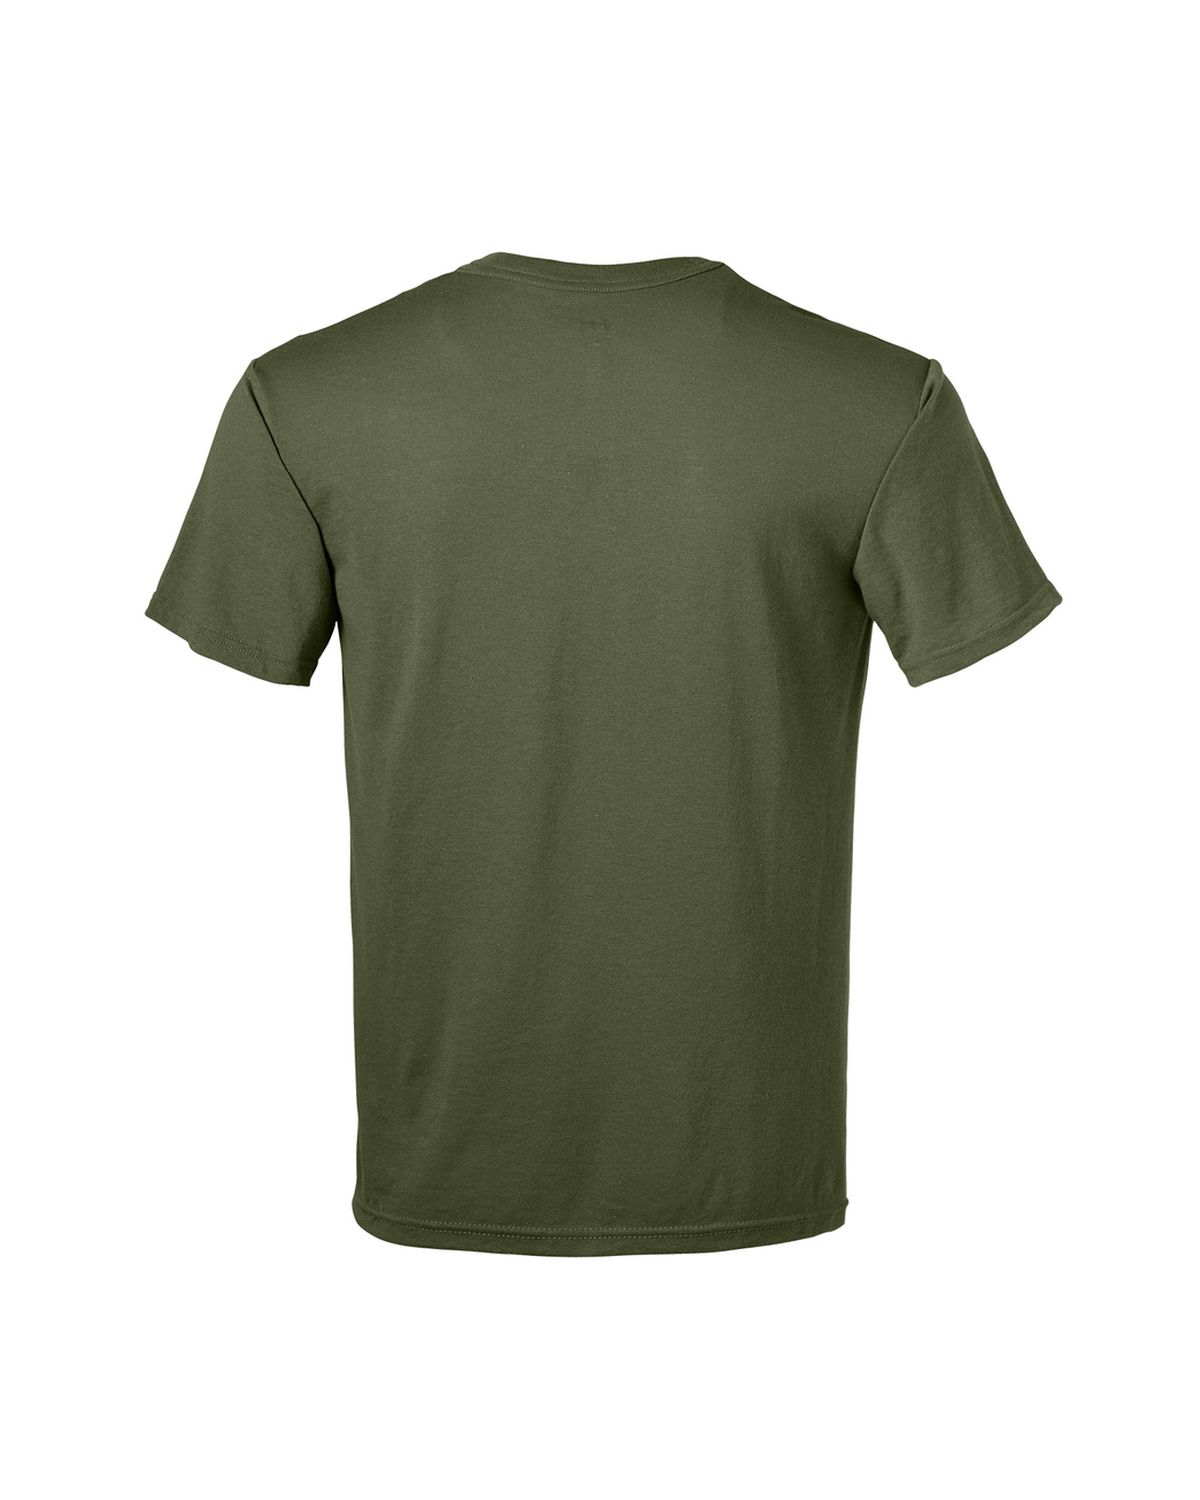 'Delta M280 Soffe Adult Unisex 50/50 Military Tee USA'